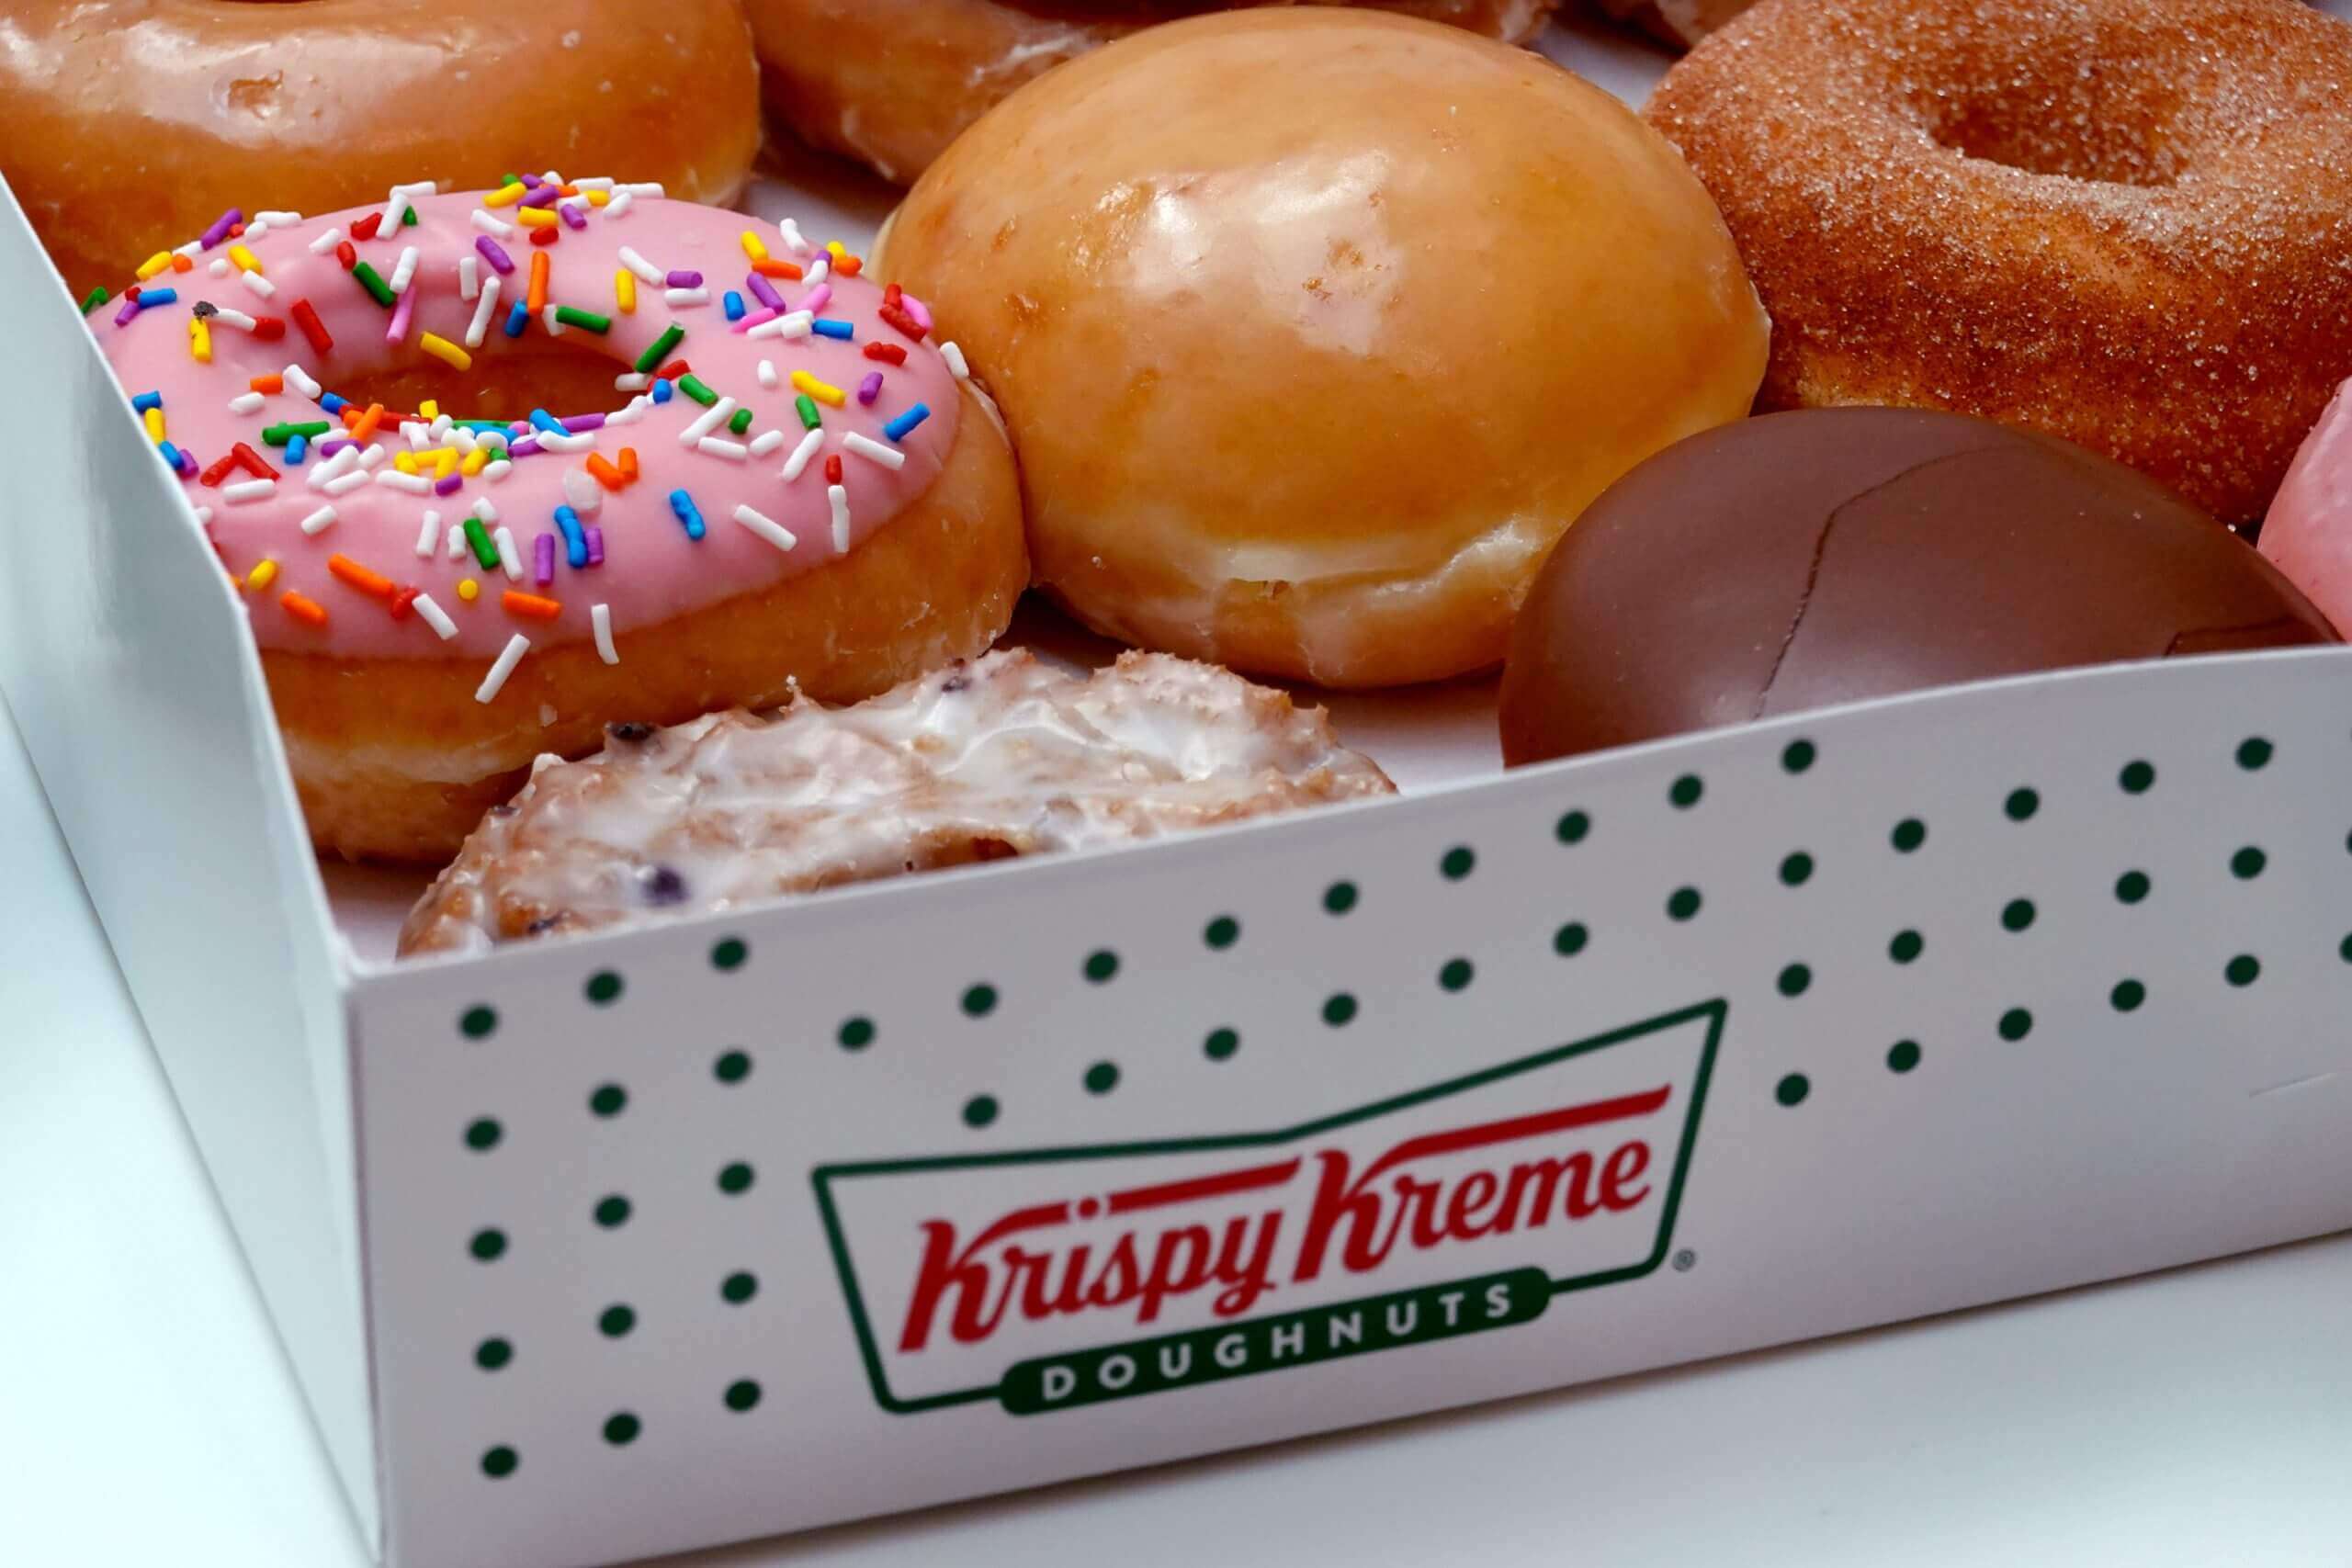 Krispy Kreme Has Given Away 1.5M+ Donuts to Vaccinated People ...